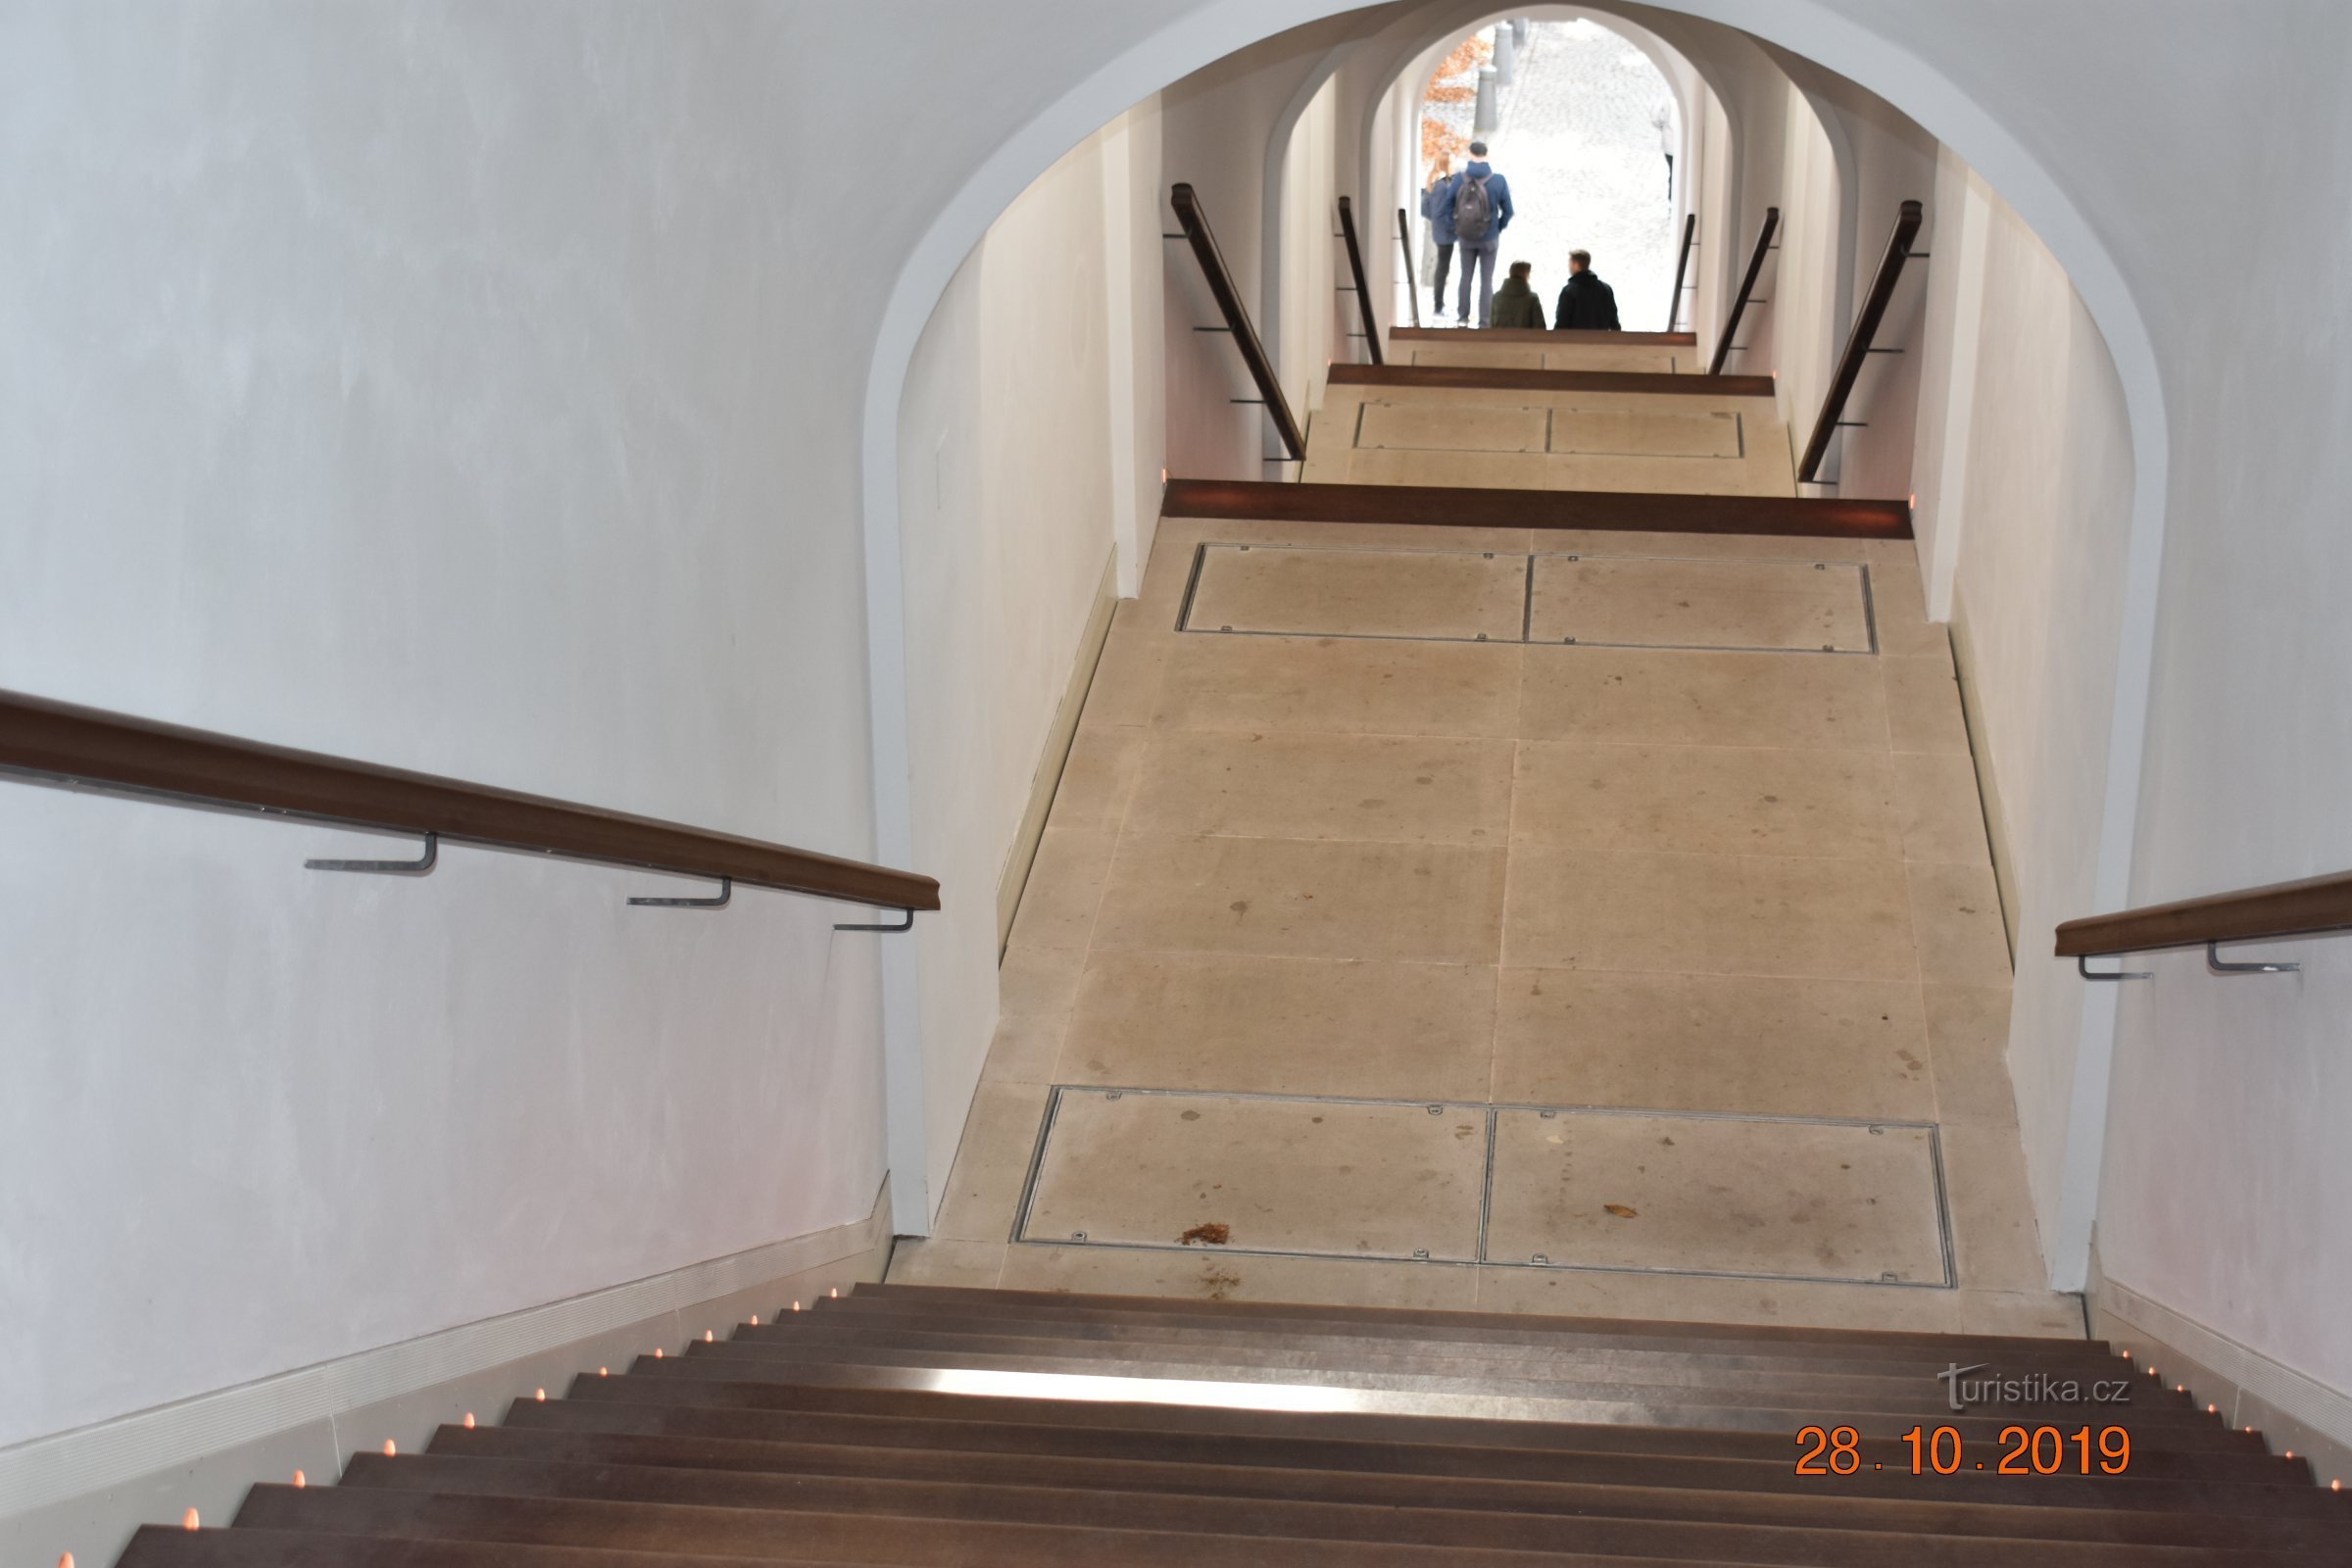 Bono publico staircase in Hradec Králové after reconstruction in 2019